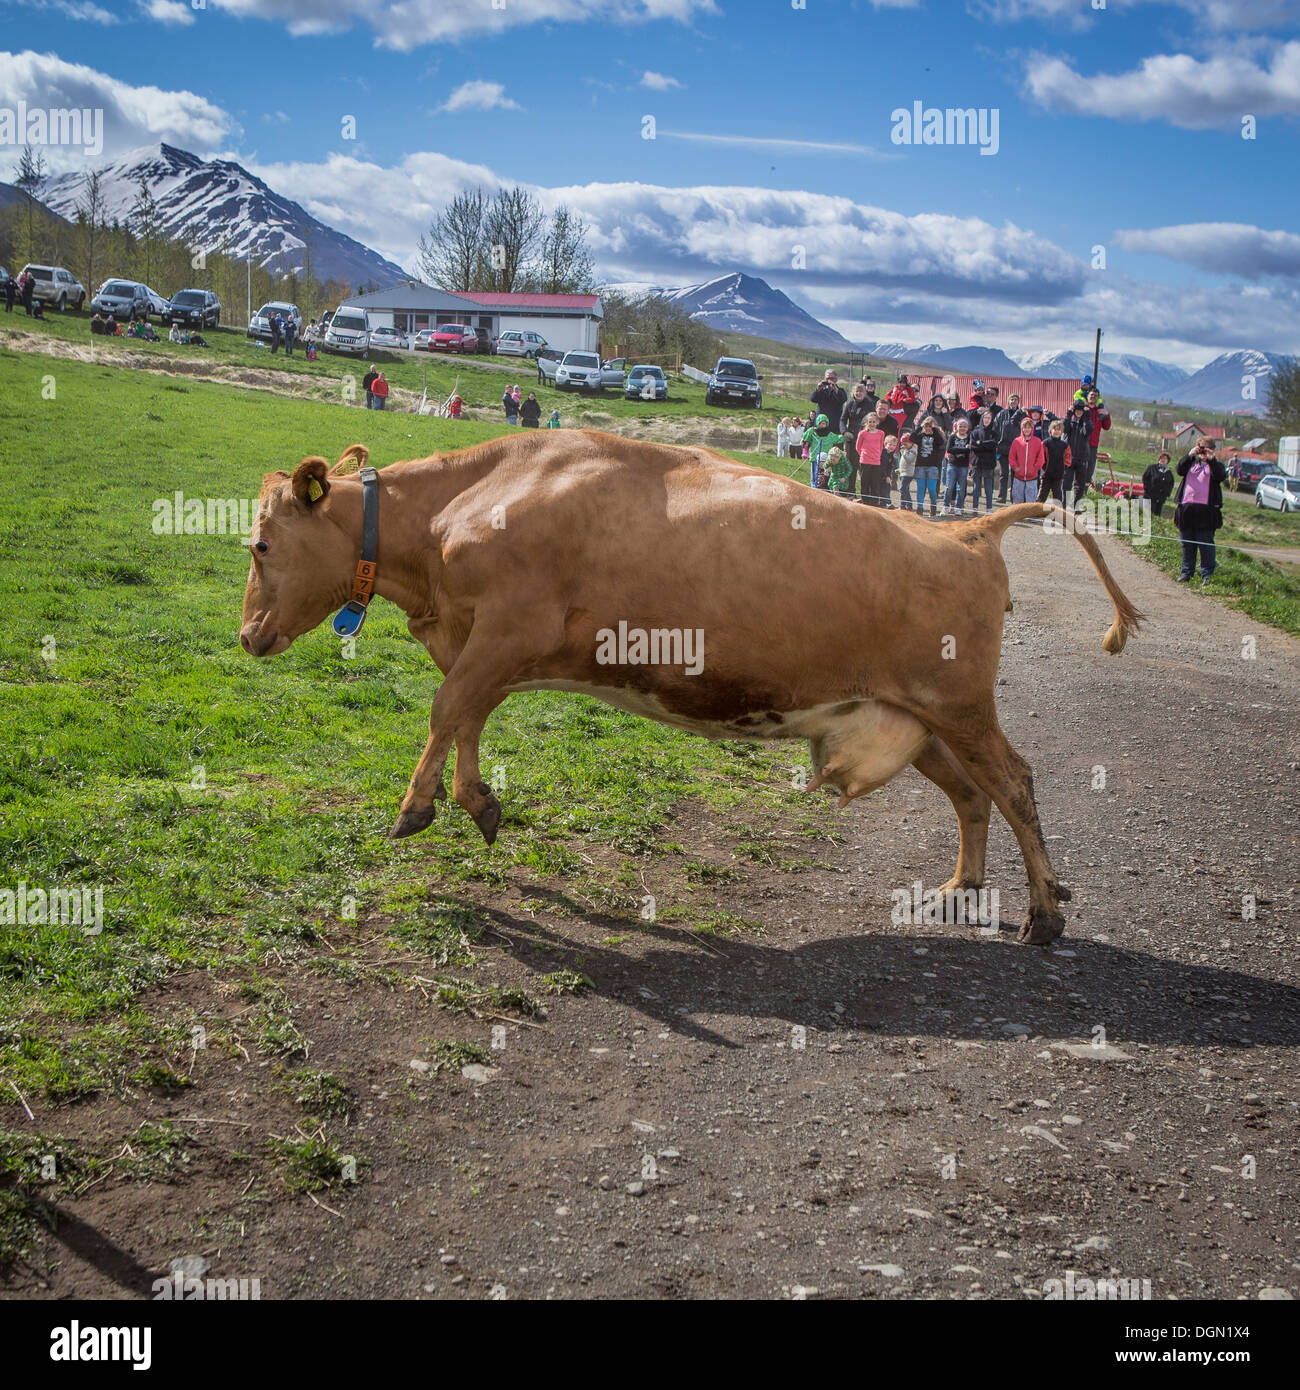 People watch as a dairy cows are set free to roam around after being locked inside, Akureyri, Iceland Stock Photo